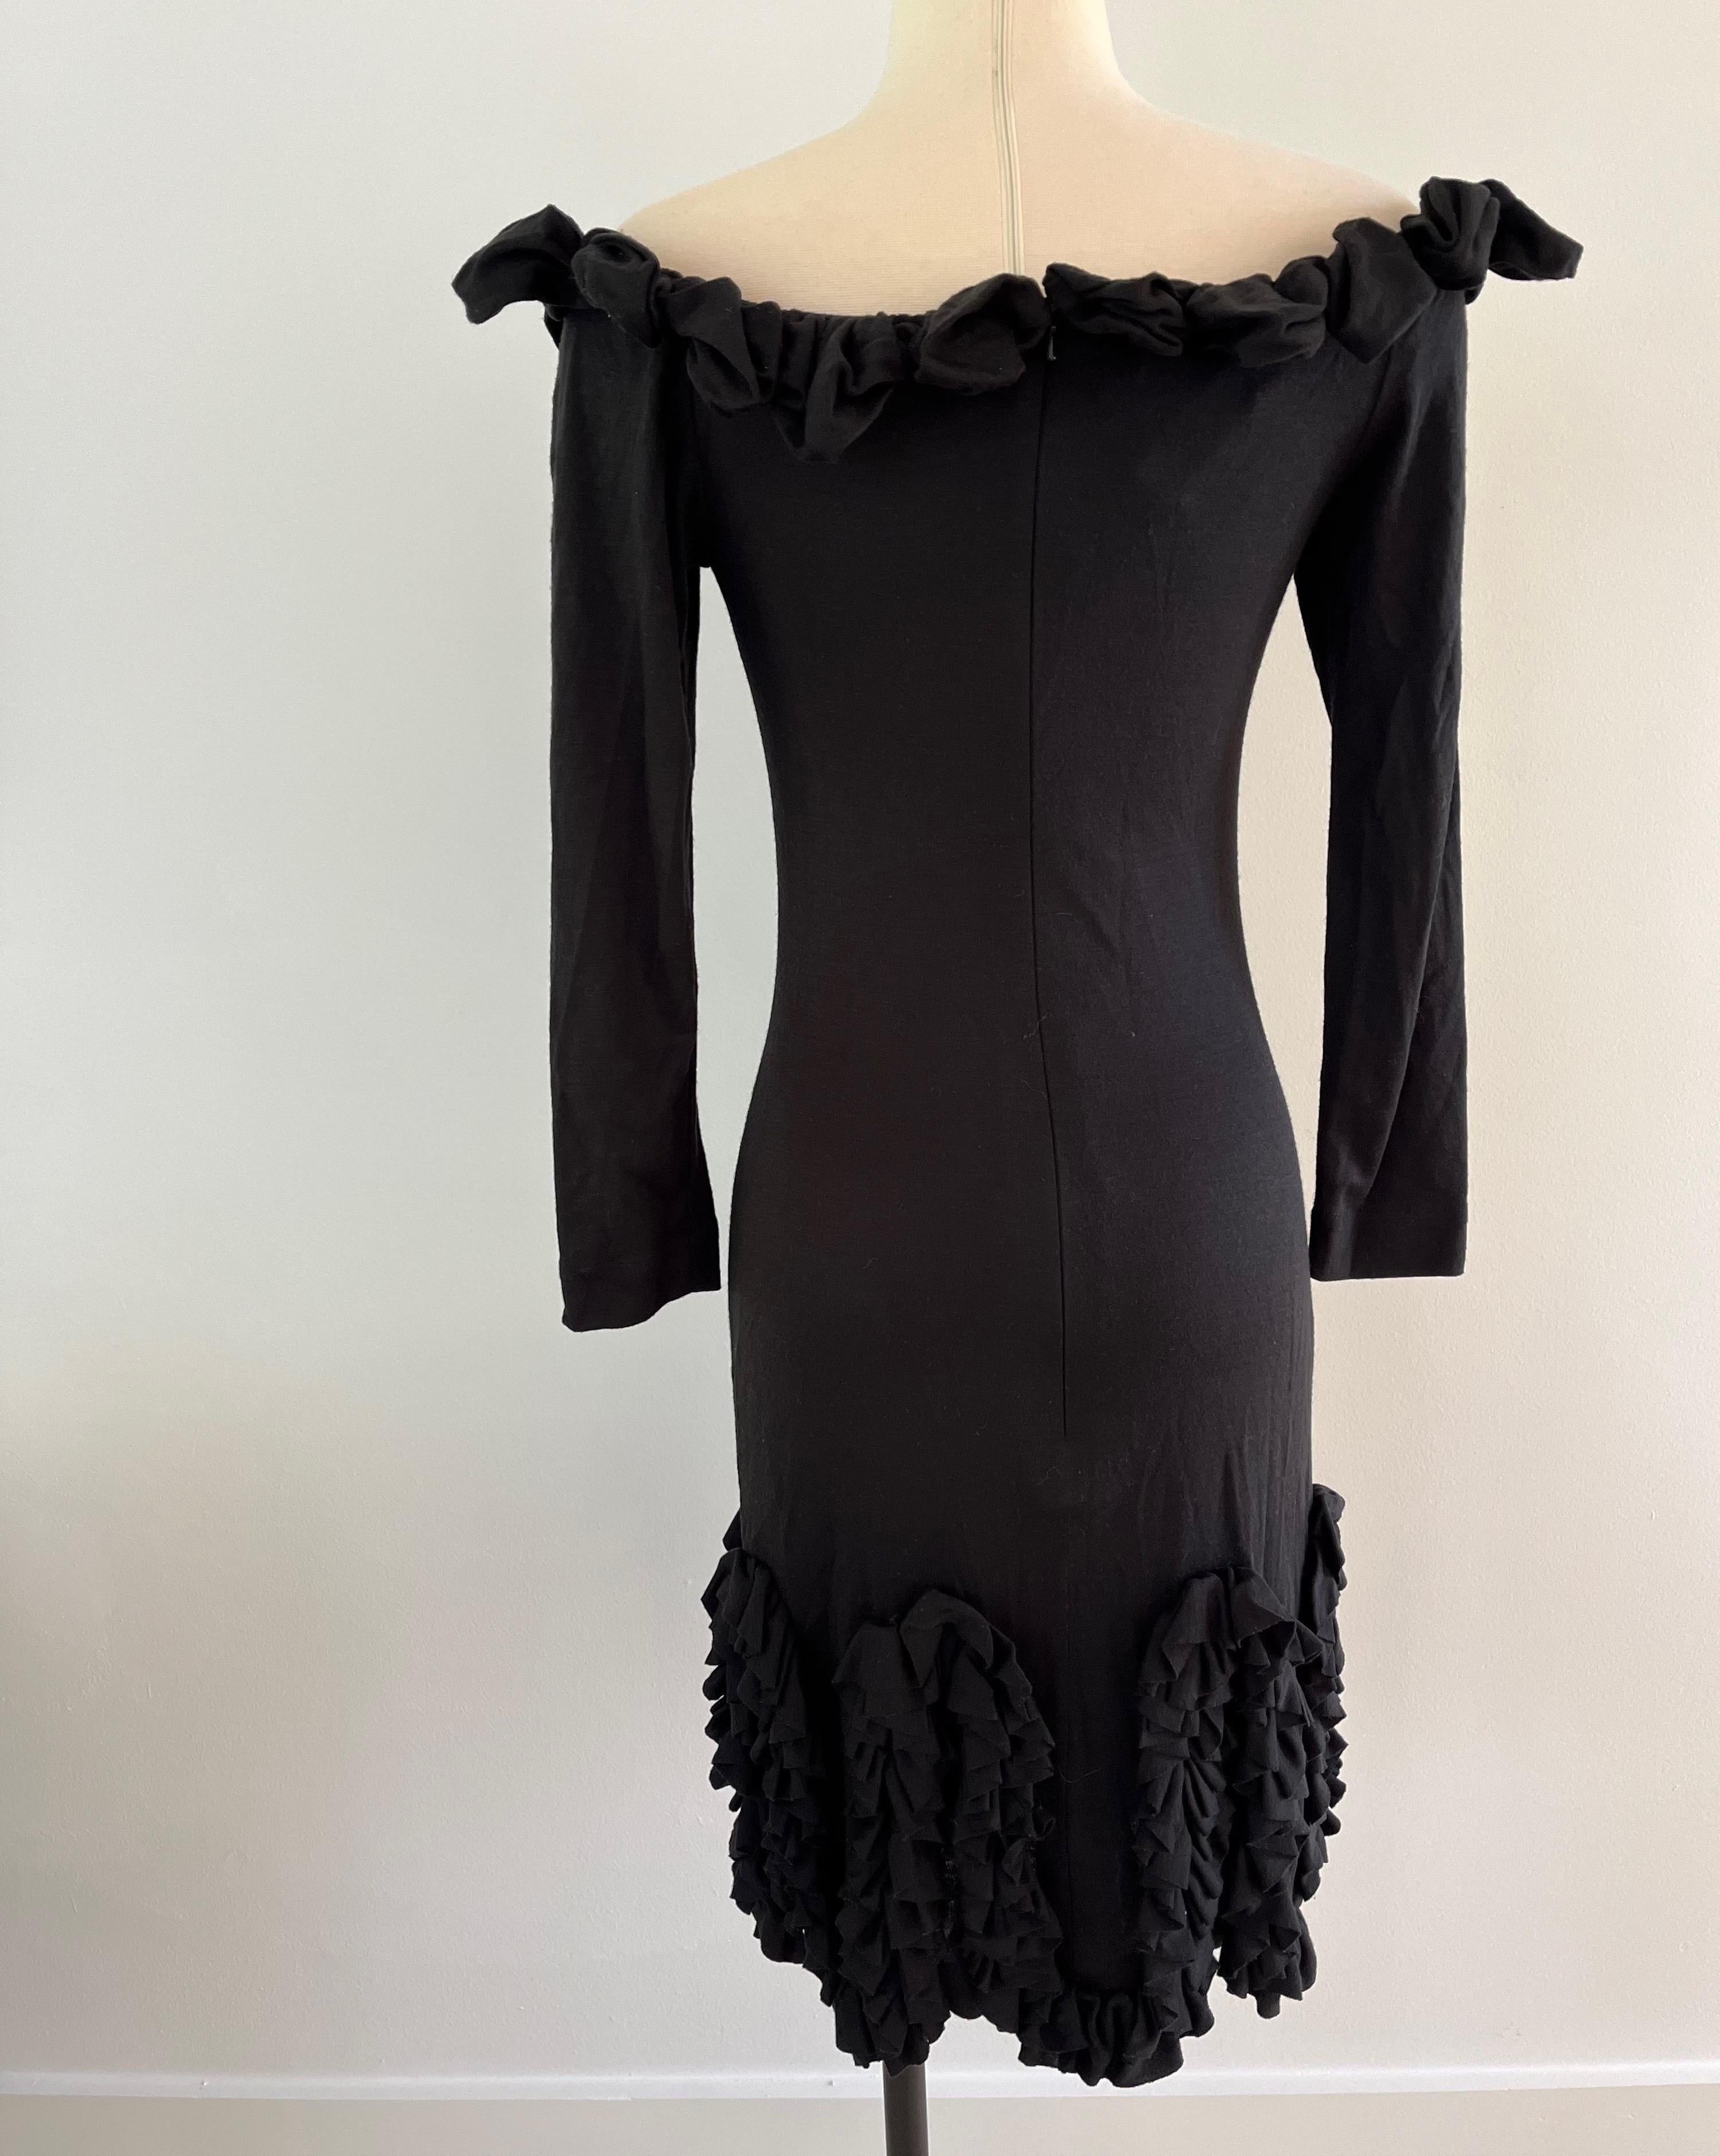 
Fun 80's Zandra Rhodes black ruffle party dress. Step back in time to the glamorous era of the 1980s with this exquisite vintage wool ruffle dress.  Dame Zandra Lindsey Rhodes is an English fashion and textile designer known for her incredible